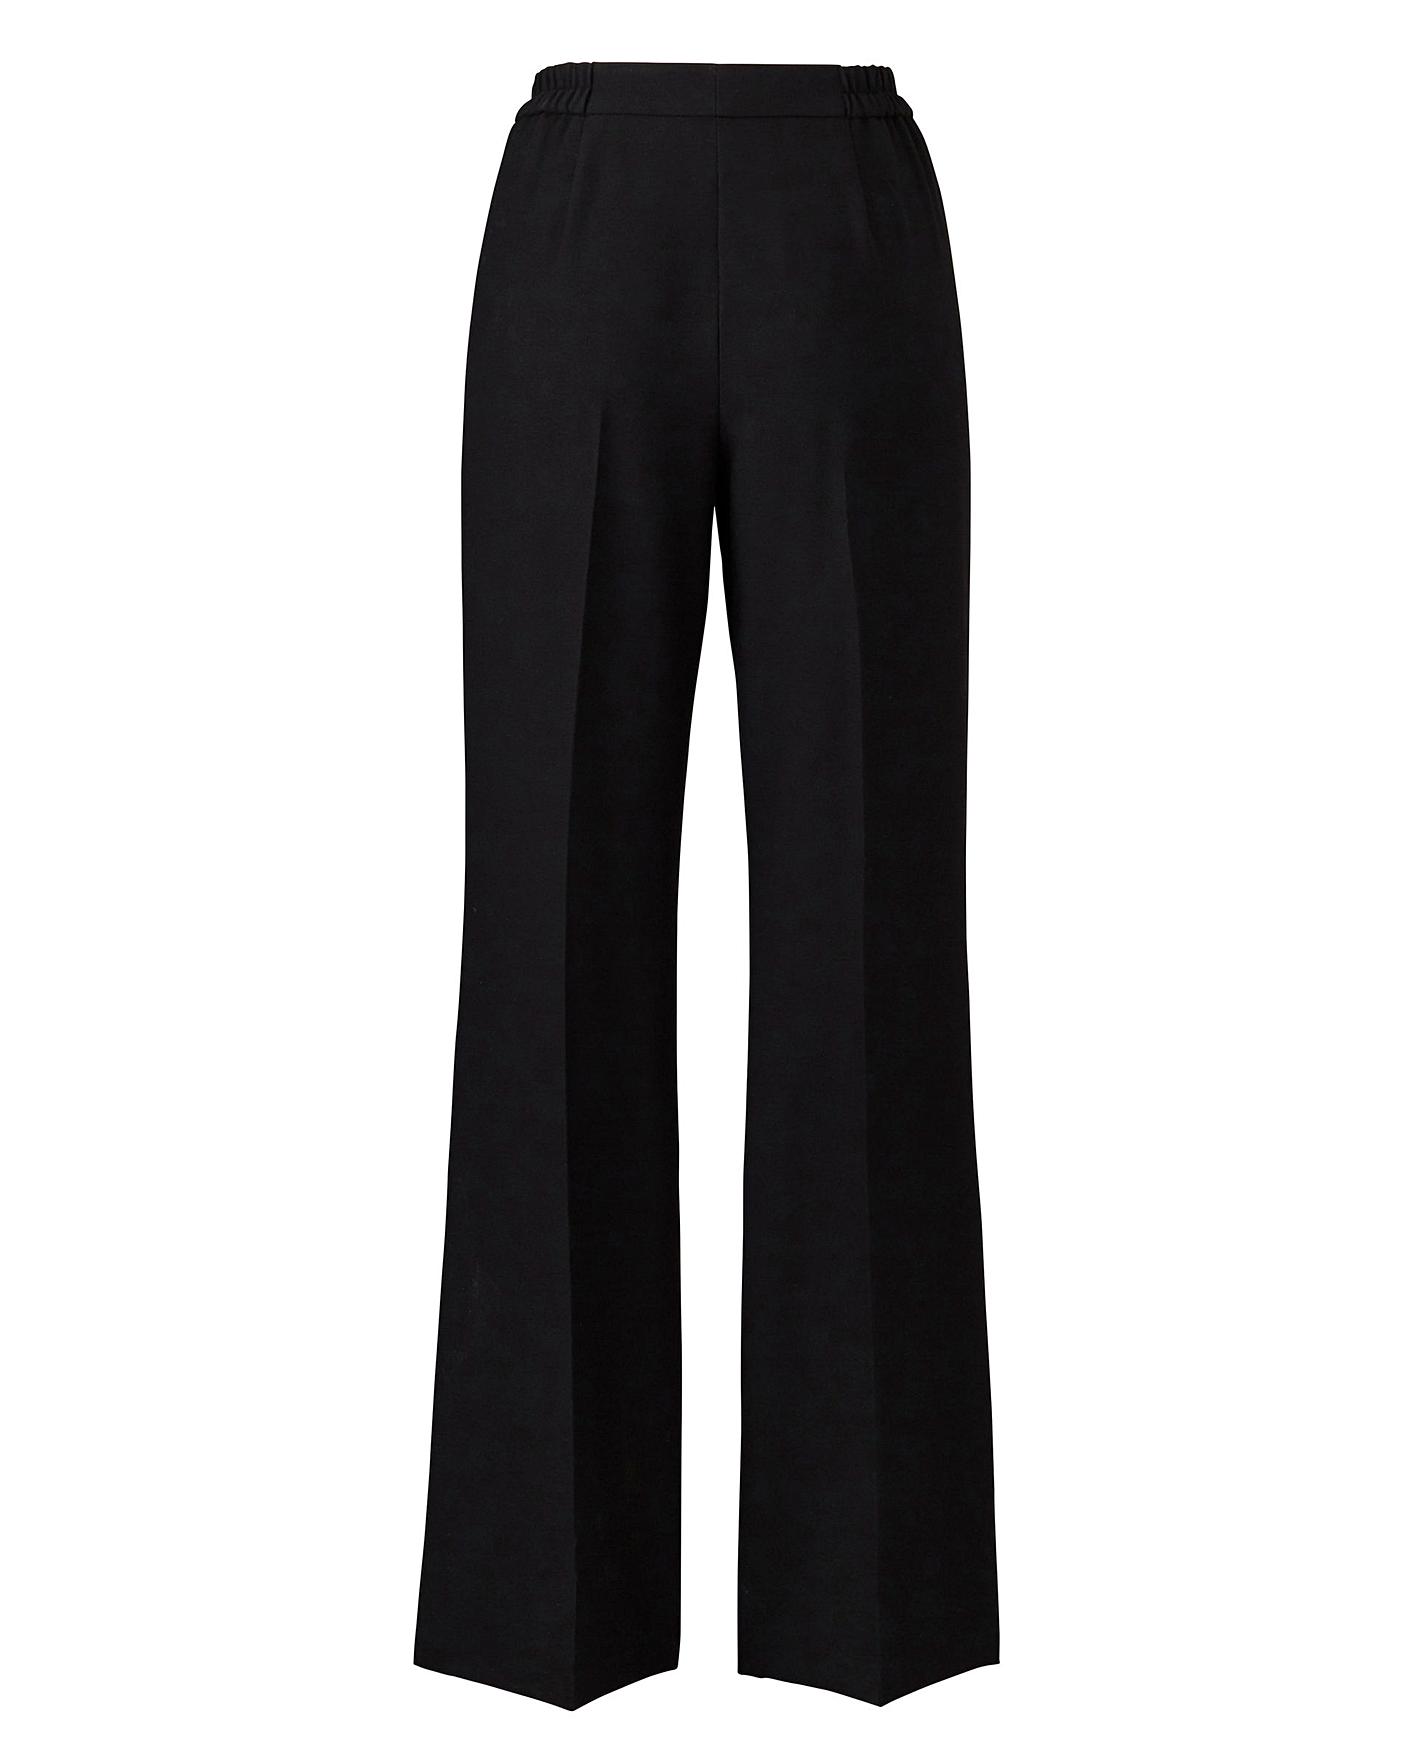 Joanna Hope Stretch Wide Leg Trousers | Simply Be